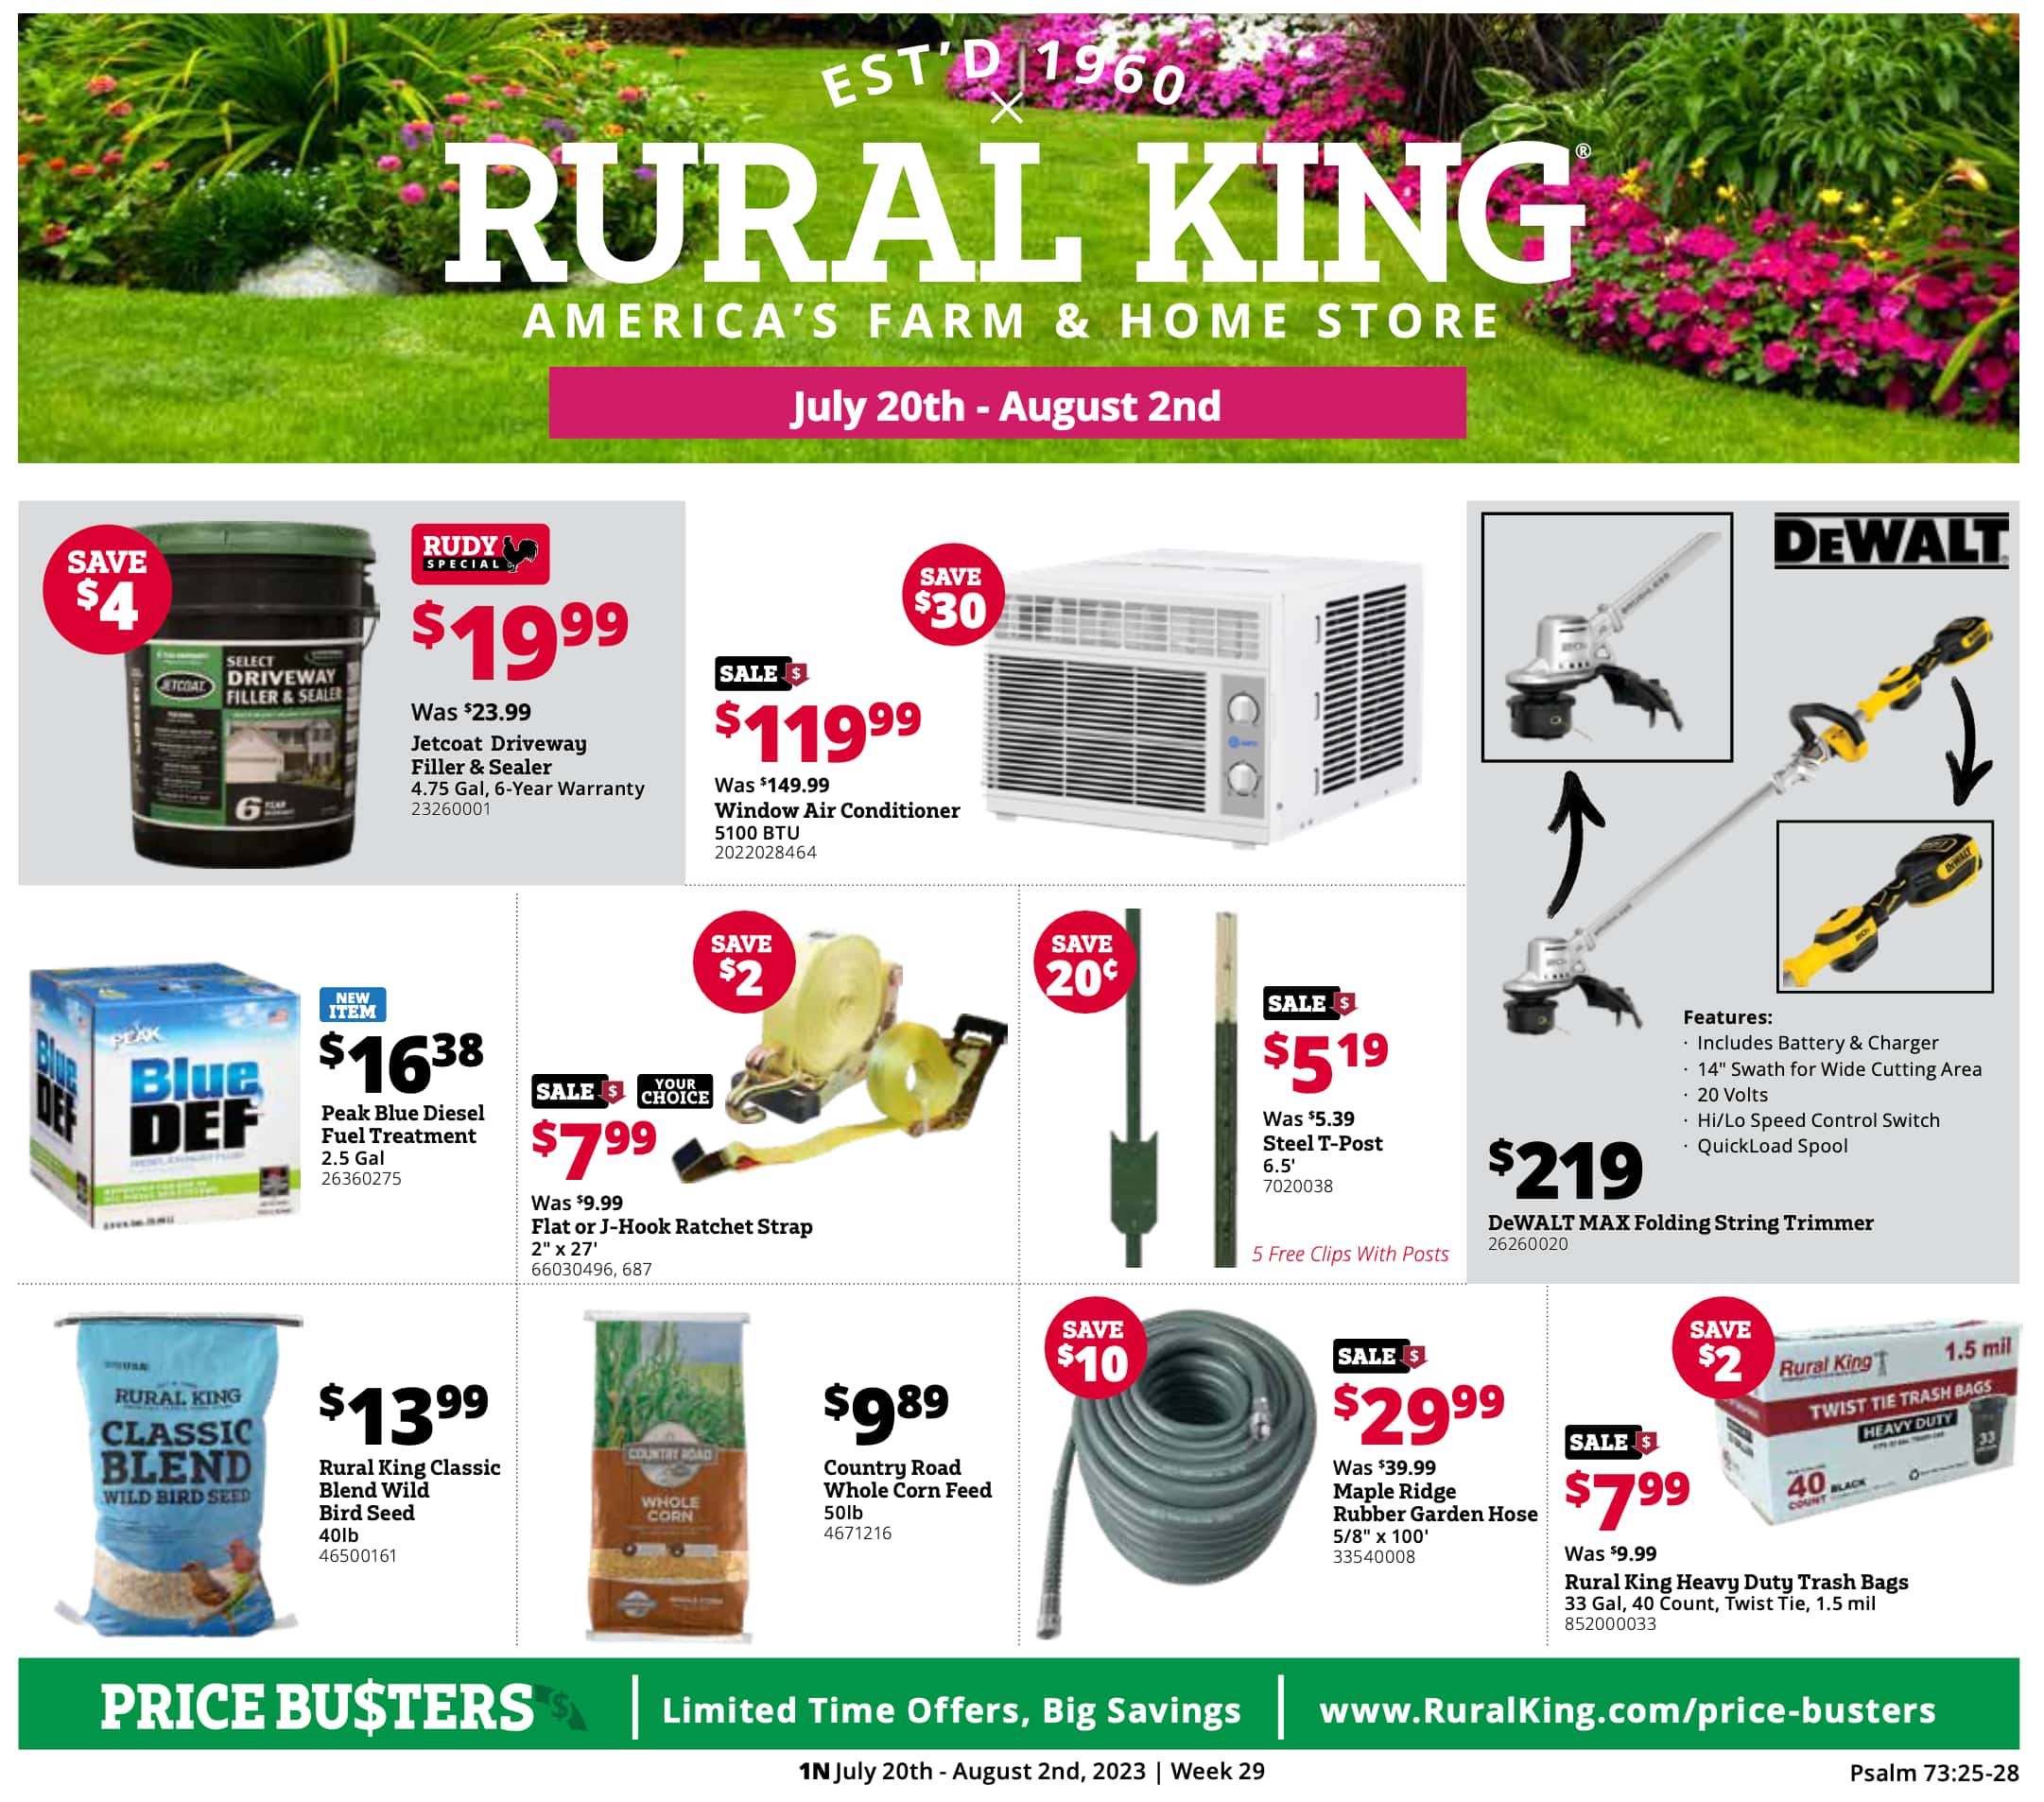 Rural King ad for this week Preview for July 20 - August 2, 2023